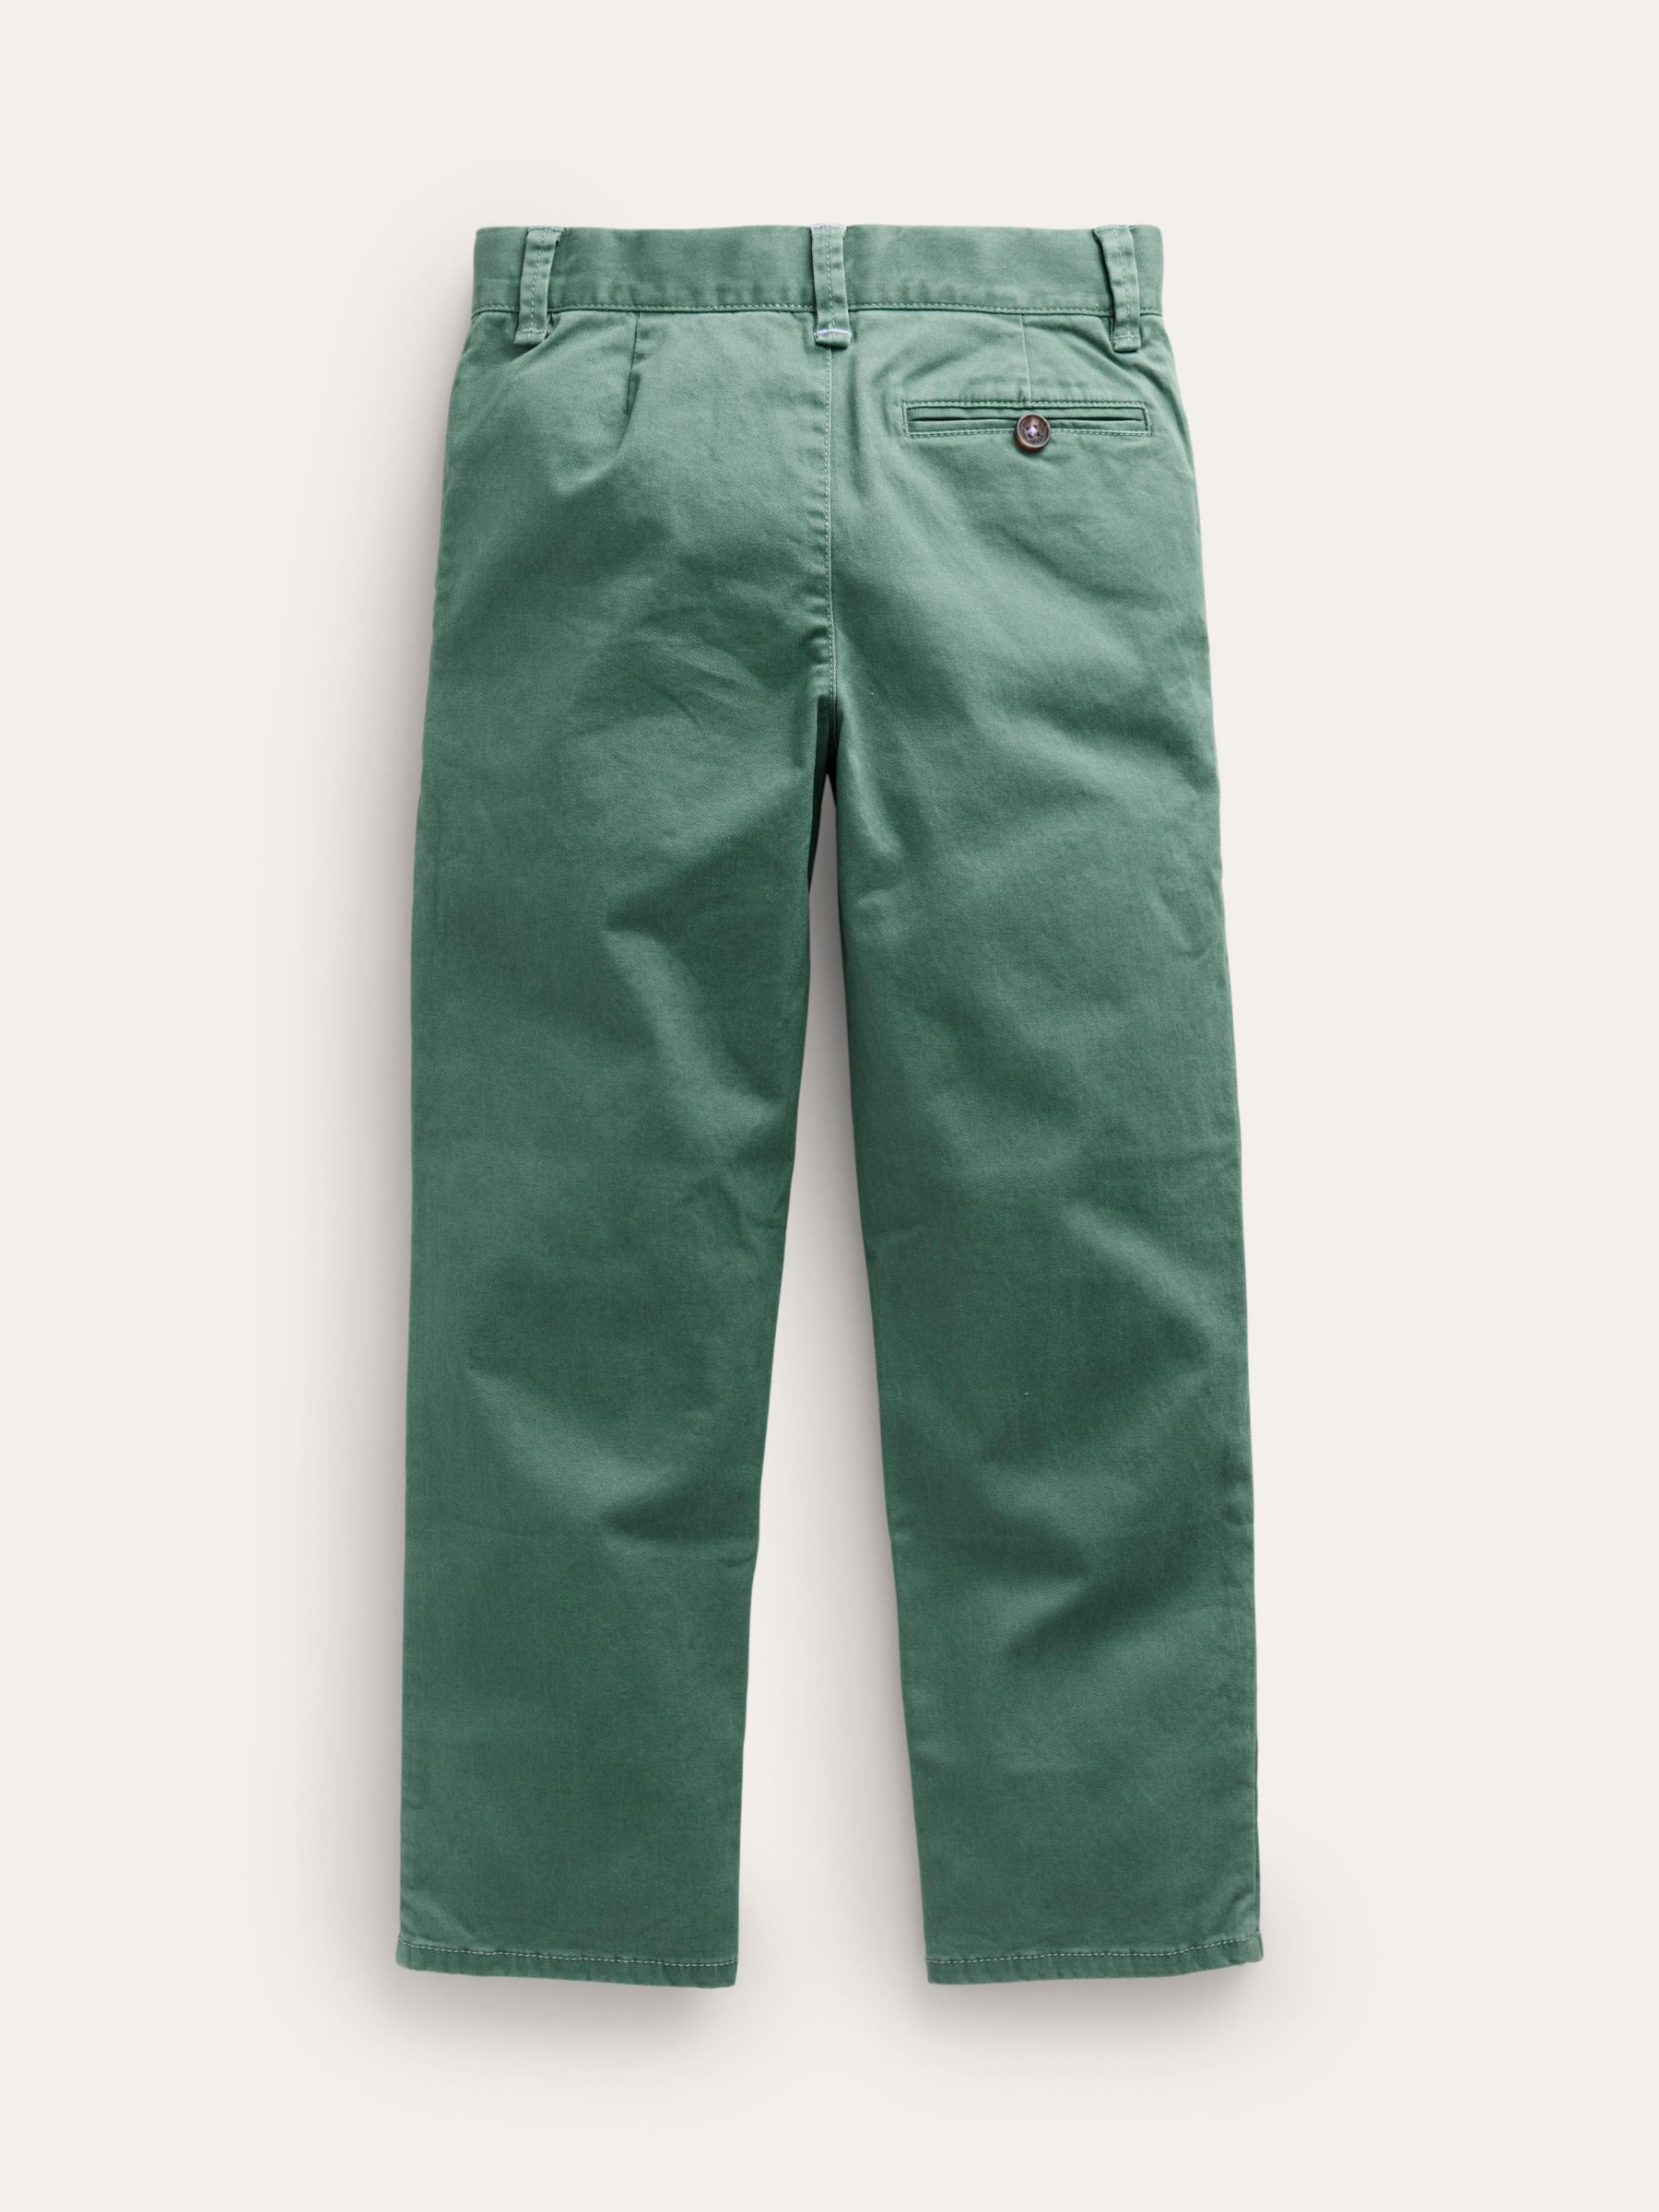 Mini Boden Kids' Classic Relax Fit Chinos, Spruce Green, 3 years